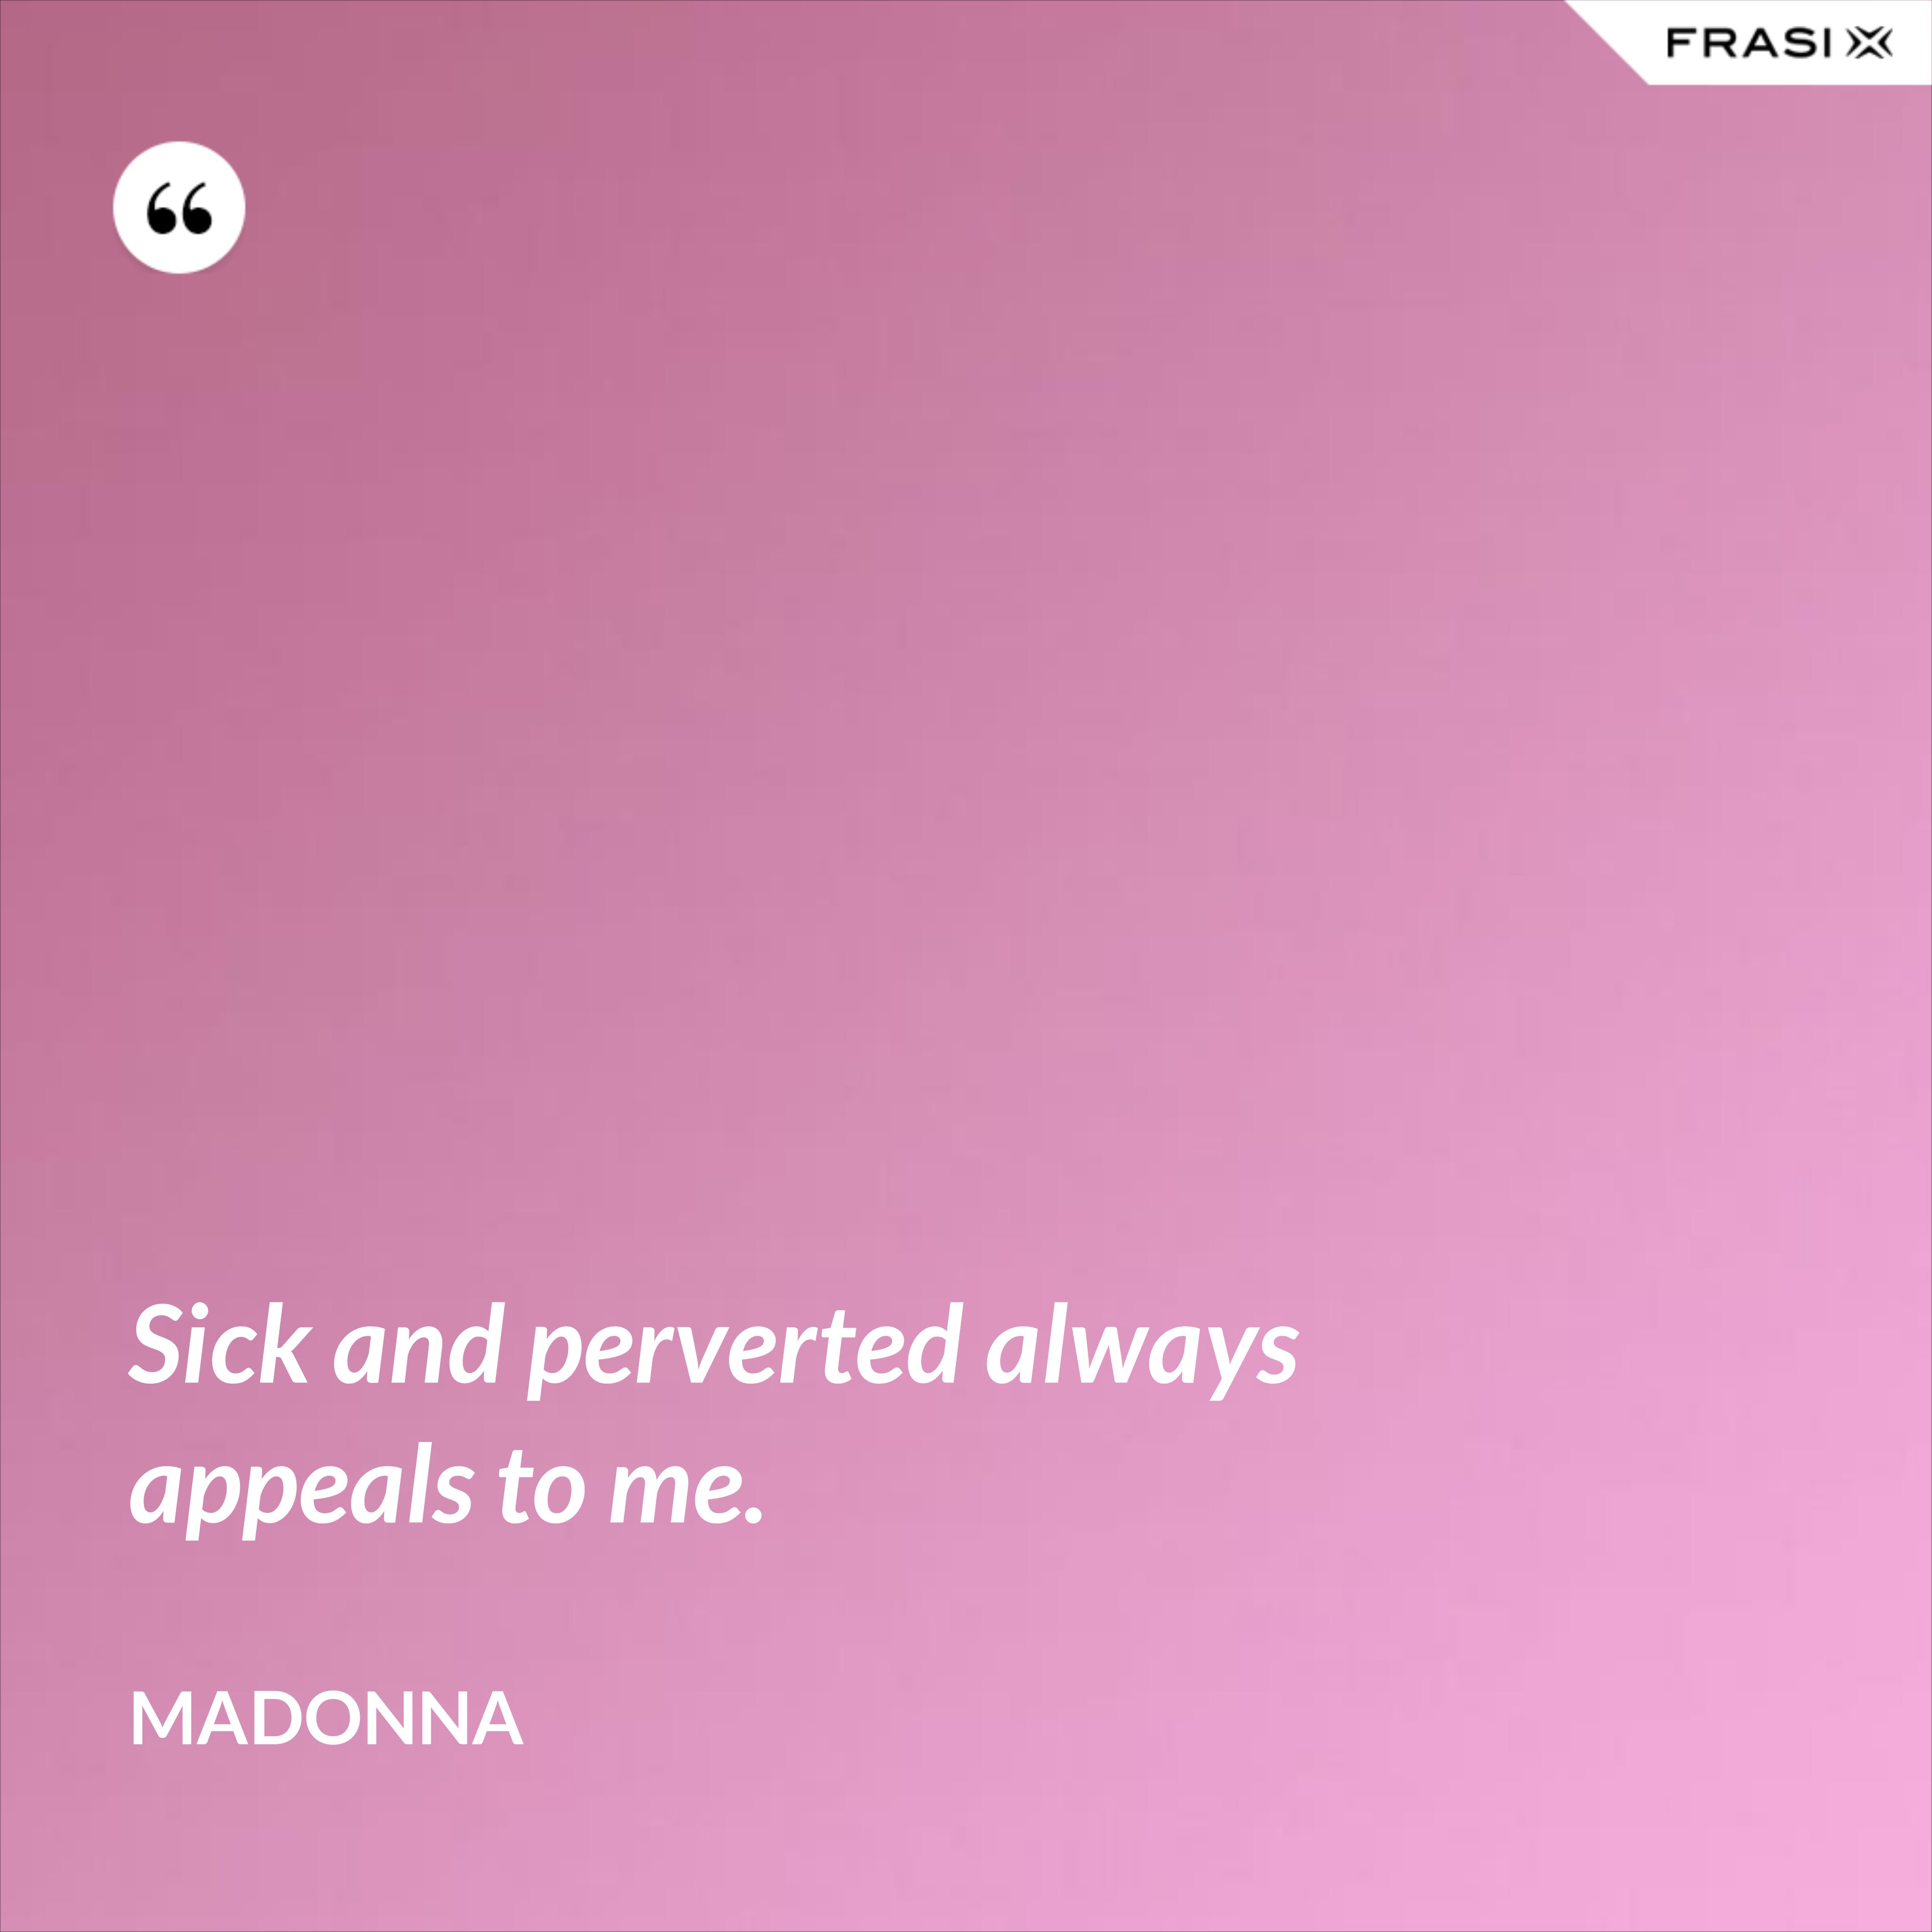 Sick and perverted always appeals to me. - Madonna